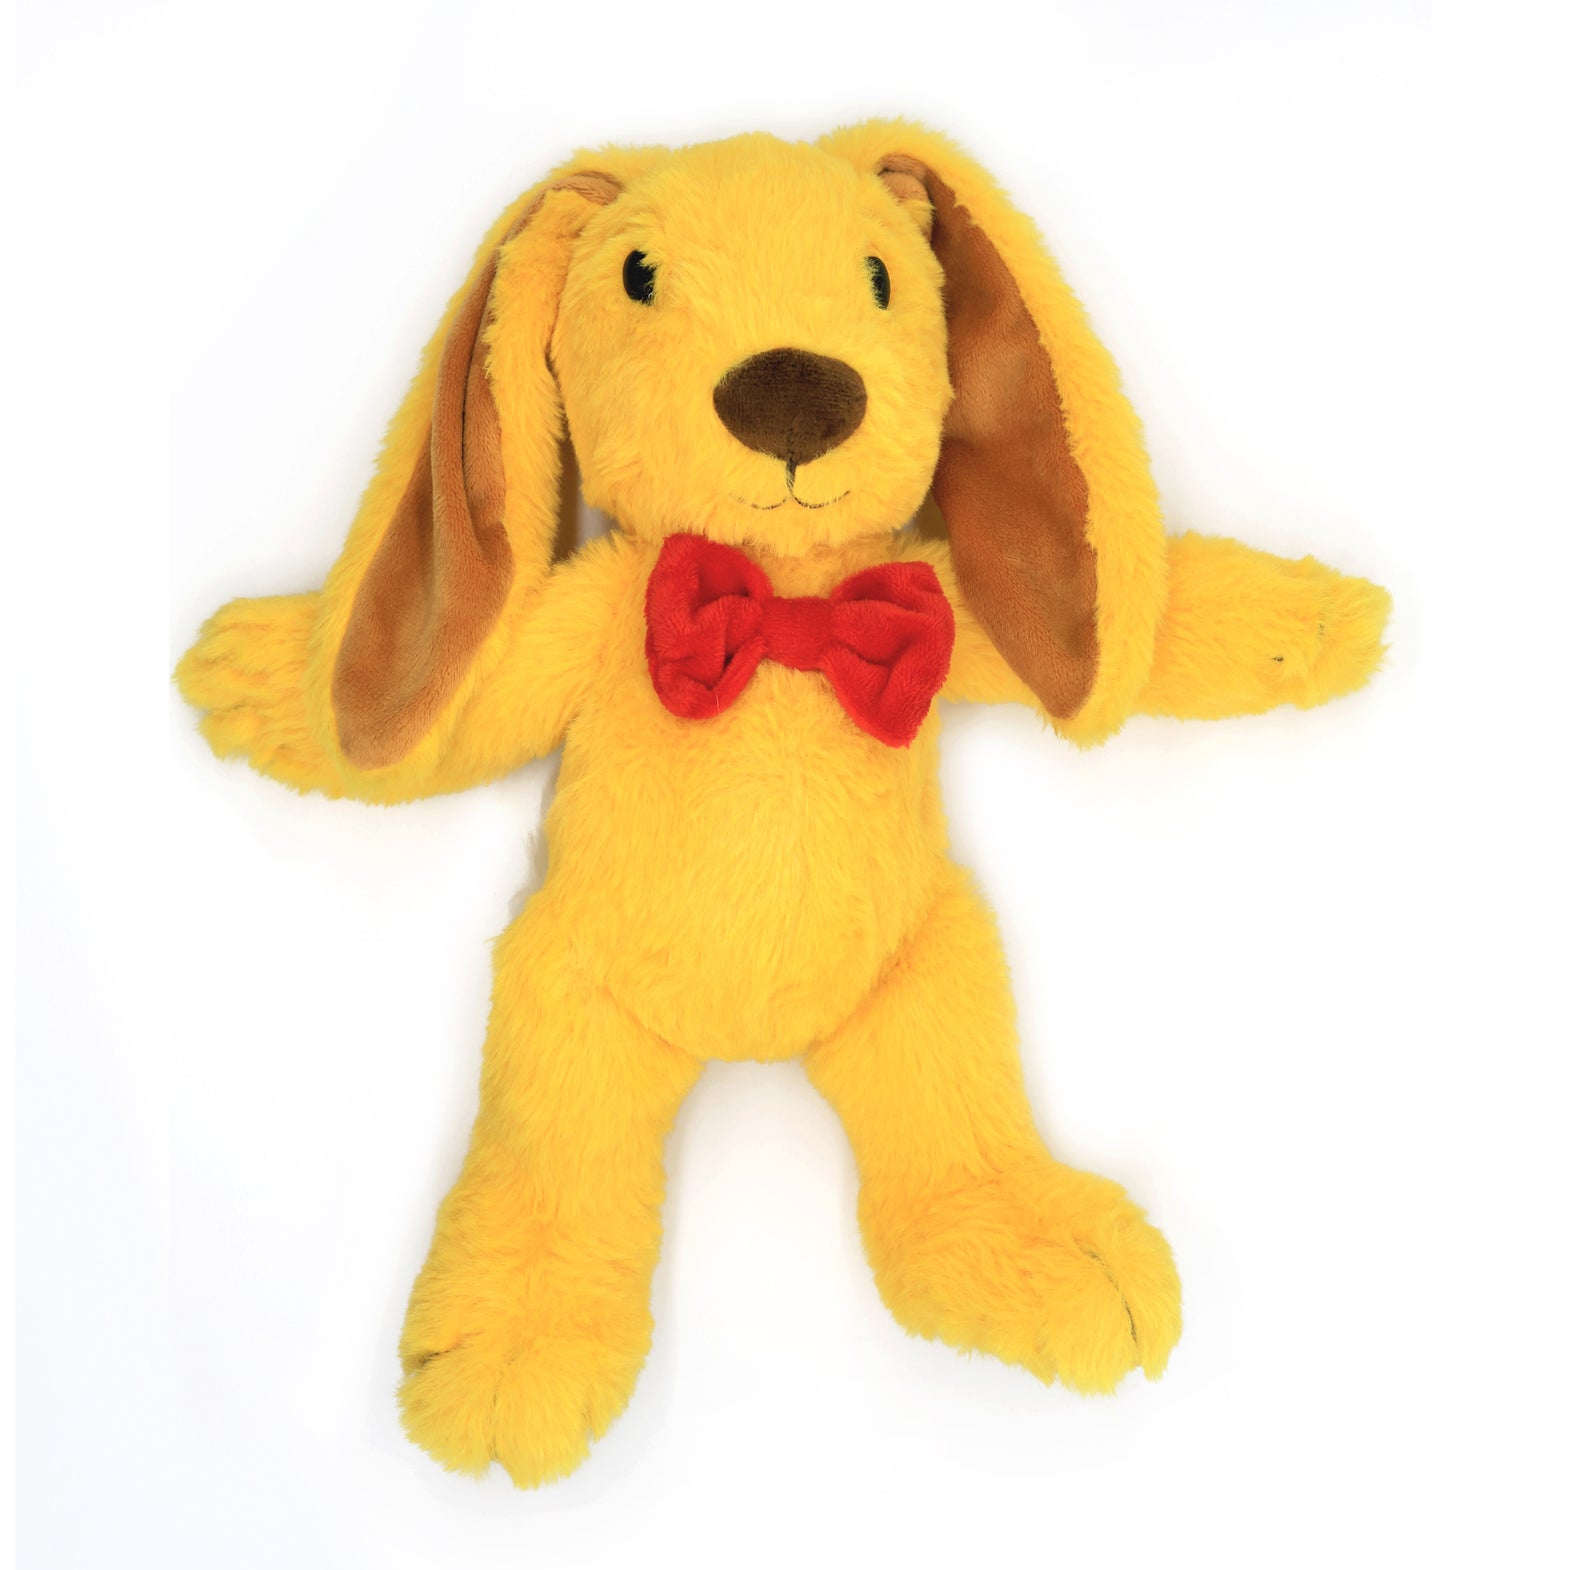 Zeke's Bunny Abacus: The Yellow Stuffed Plush comes with this BUNDLE